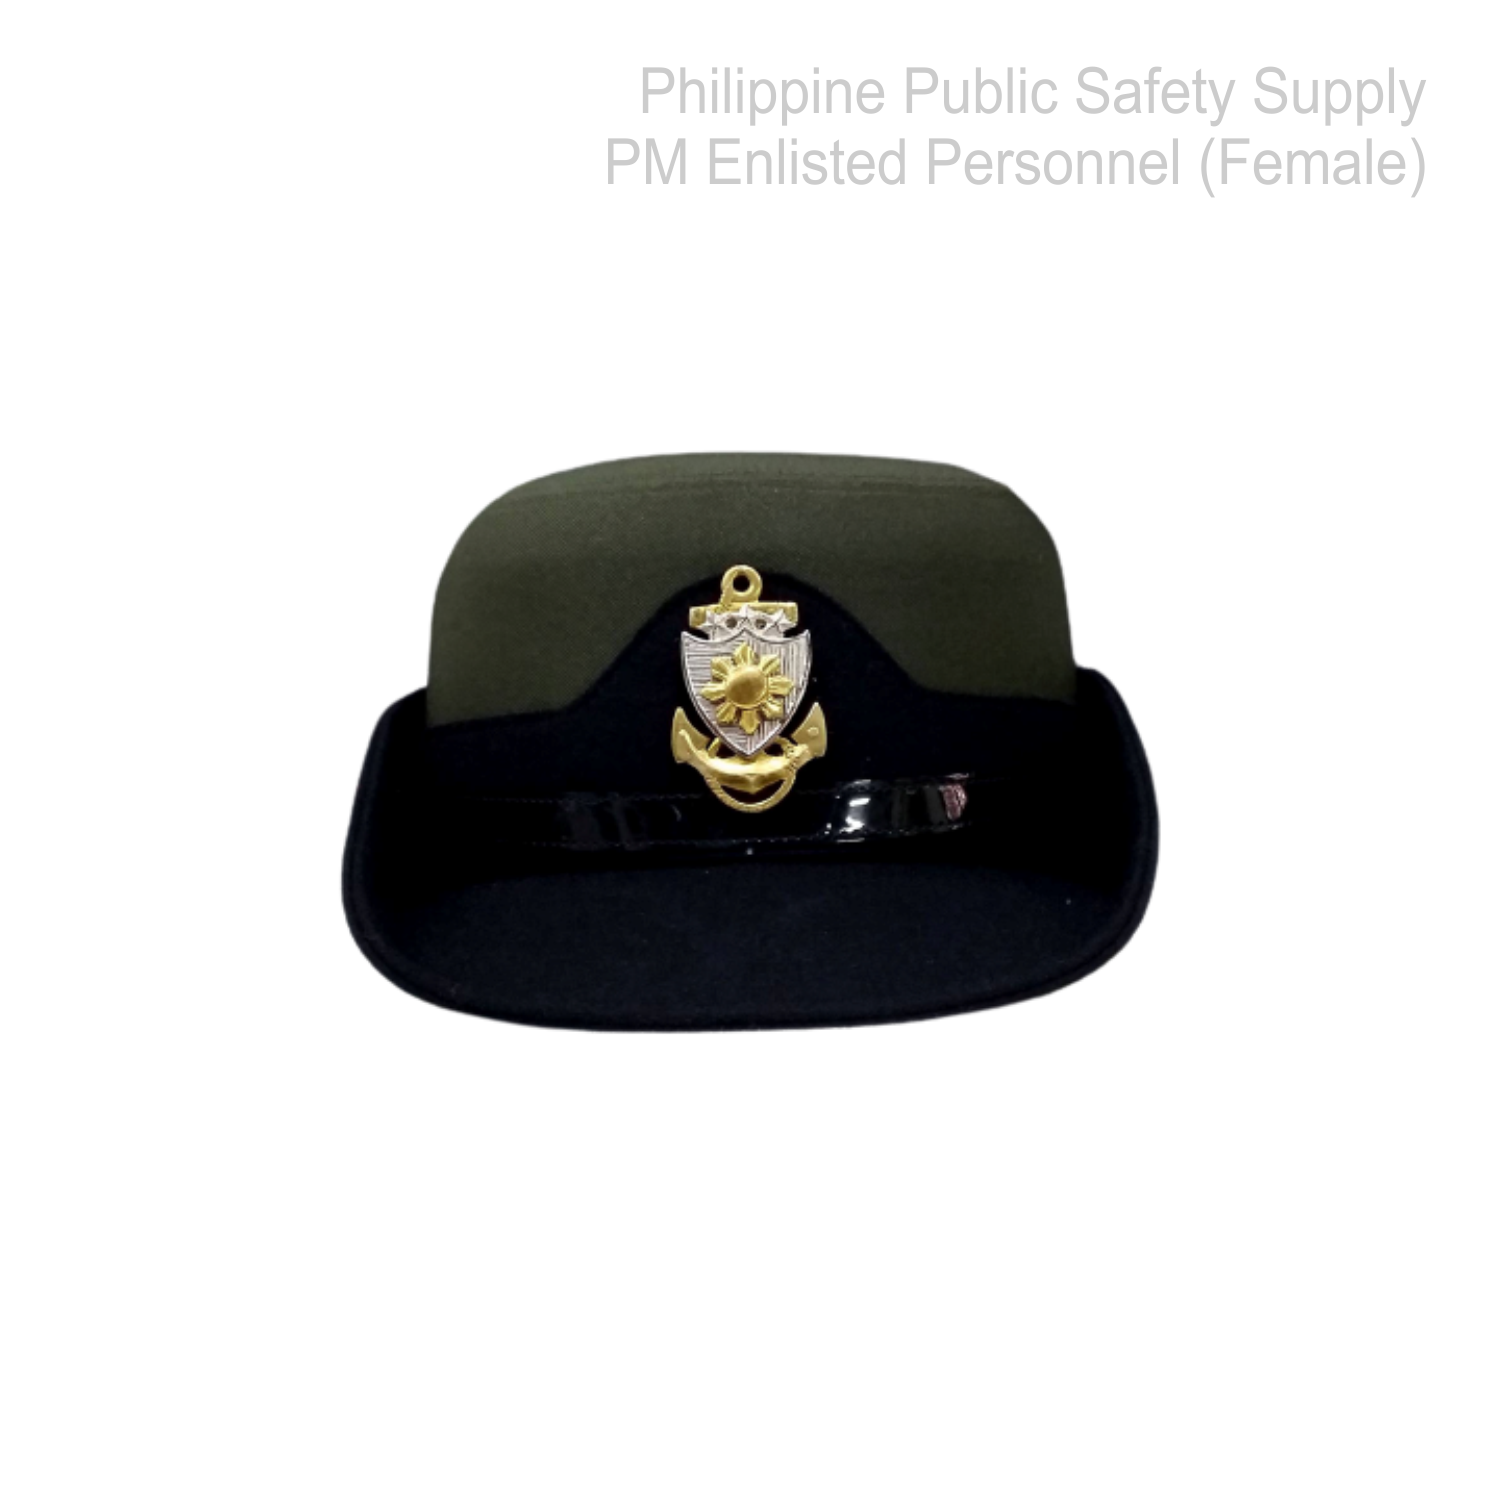 Philippine Marine Corps (PMC) Pershing Cap (Female) Enlisted Personnel - AFP